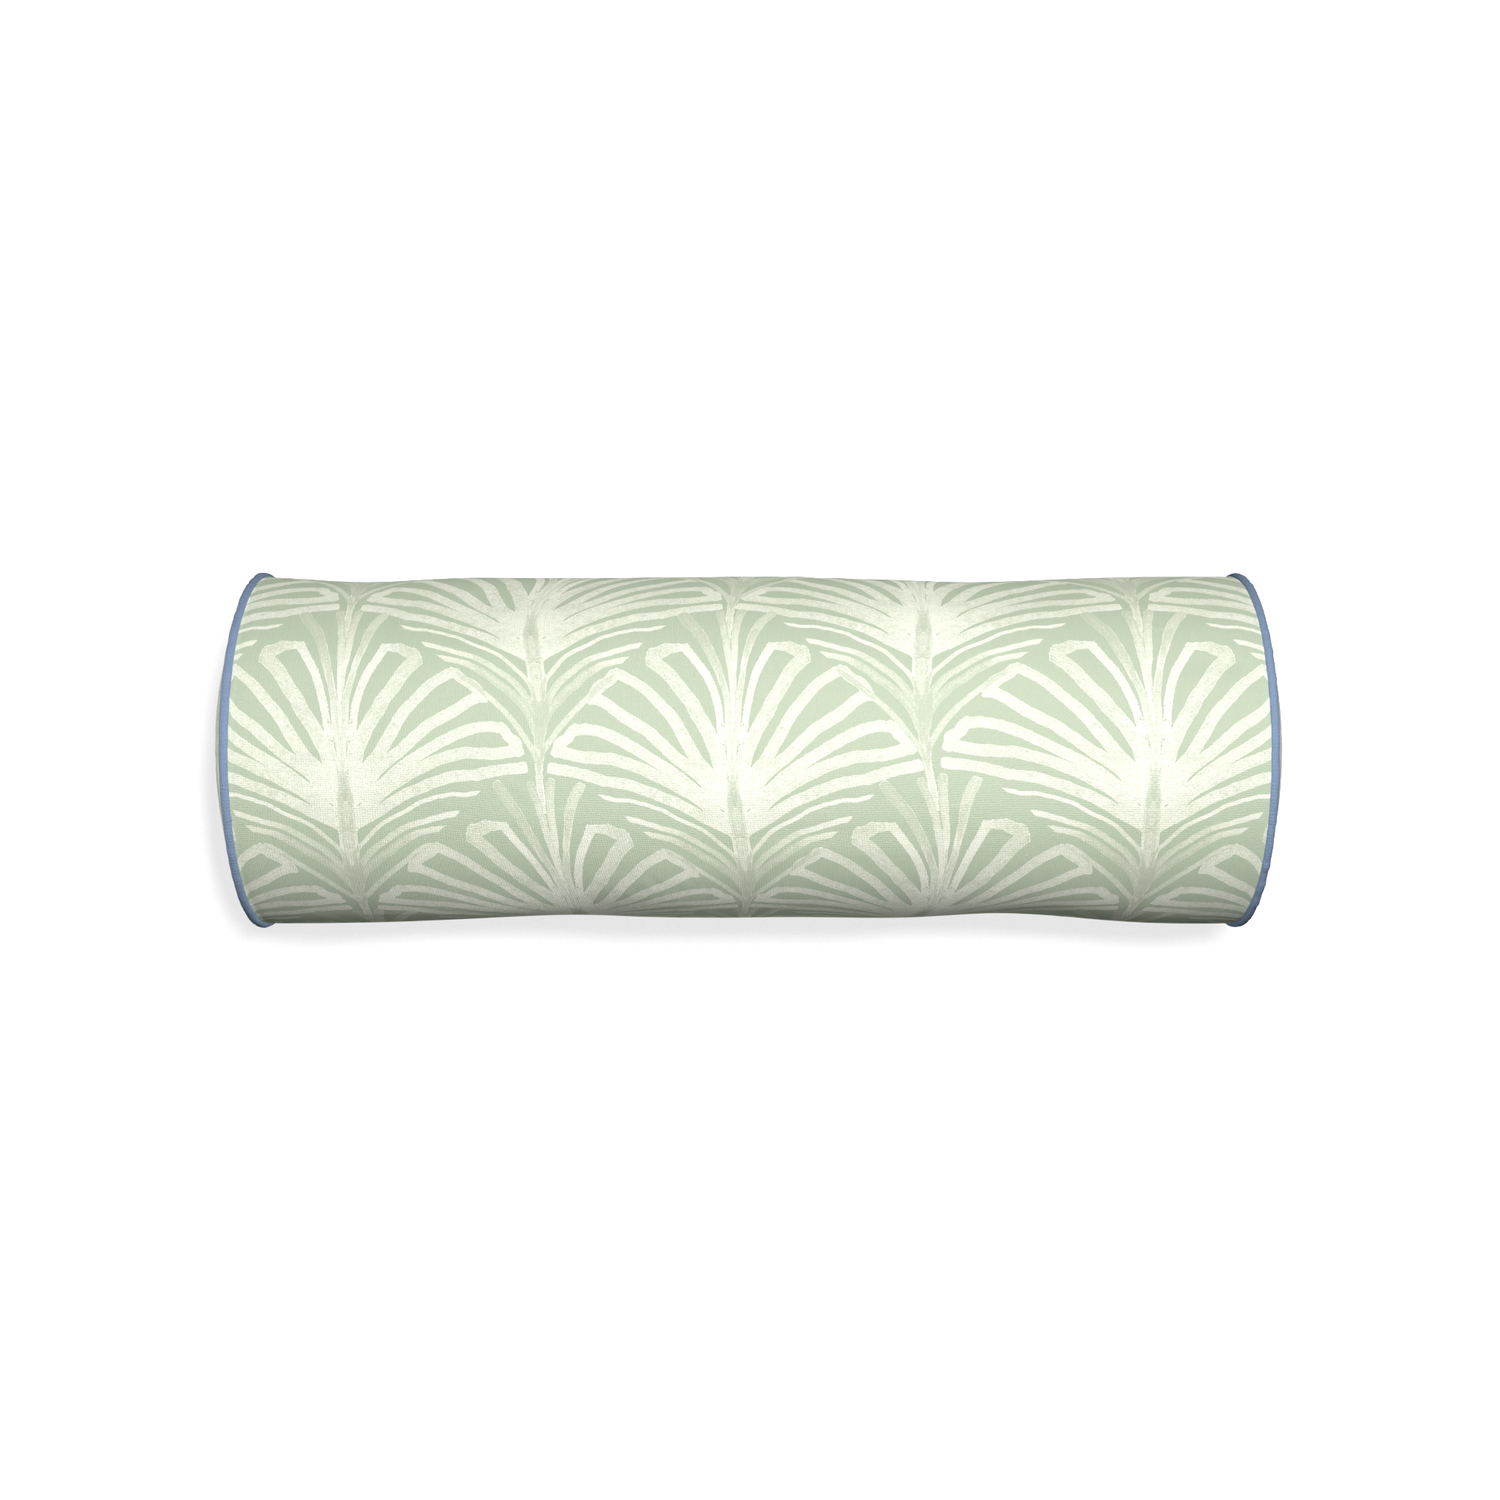 Bolster suzy sage custom sage green palmpillow with sky piping on white background